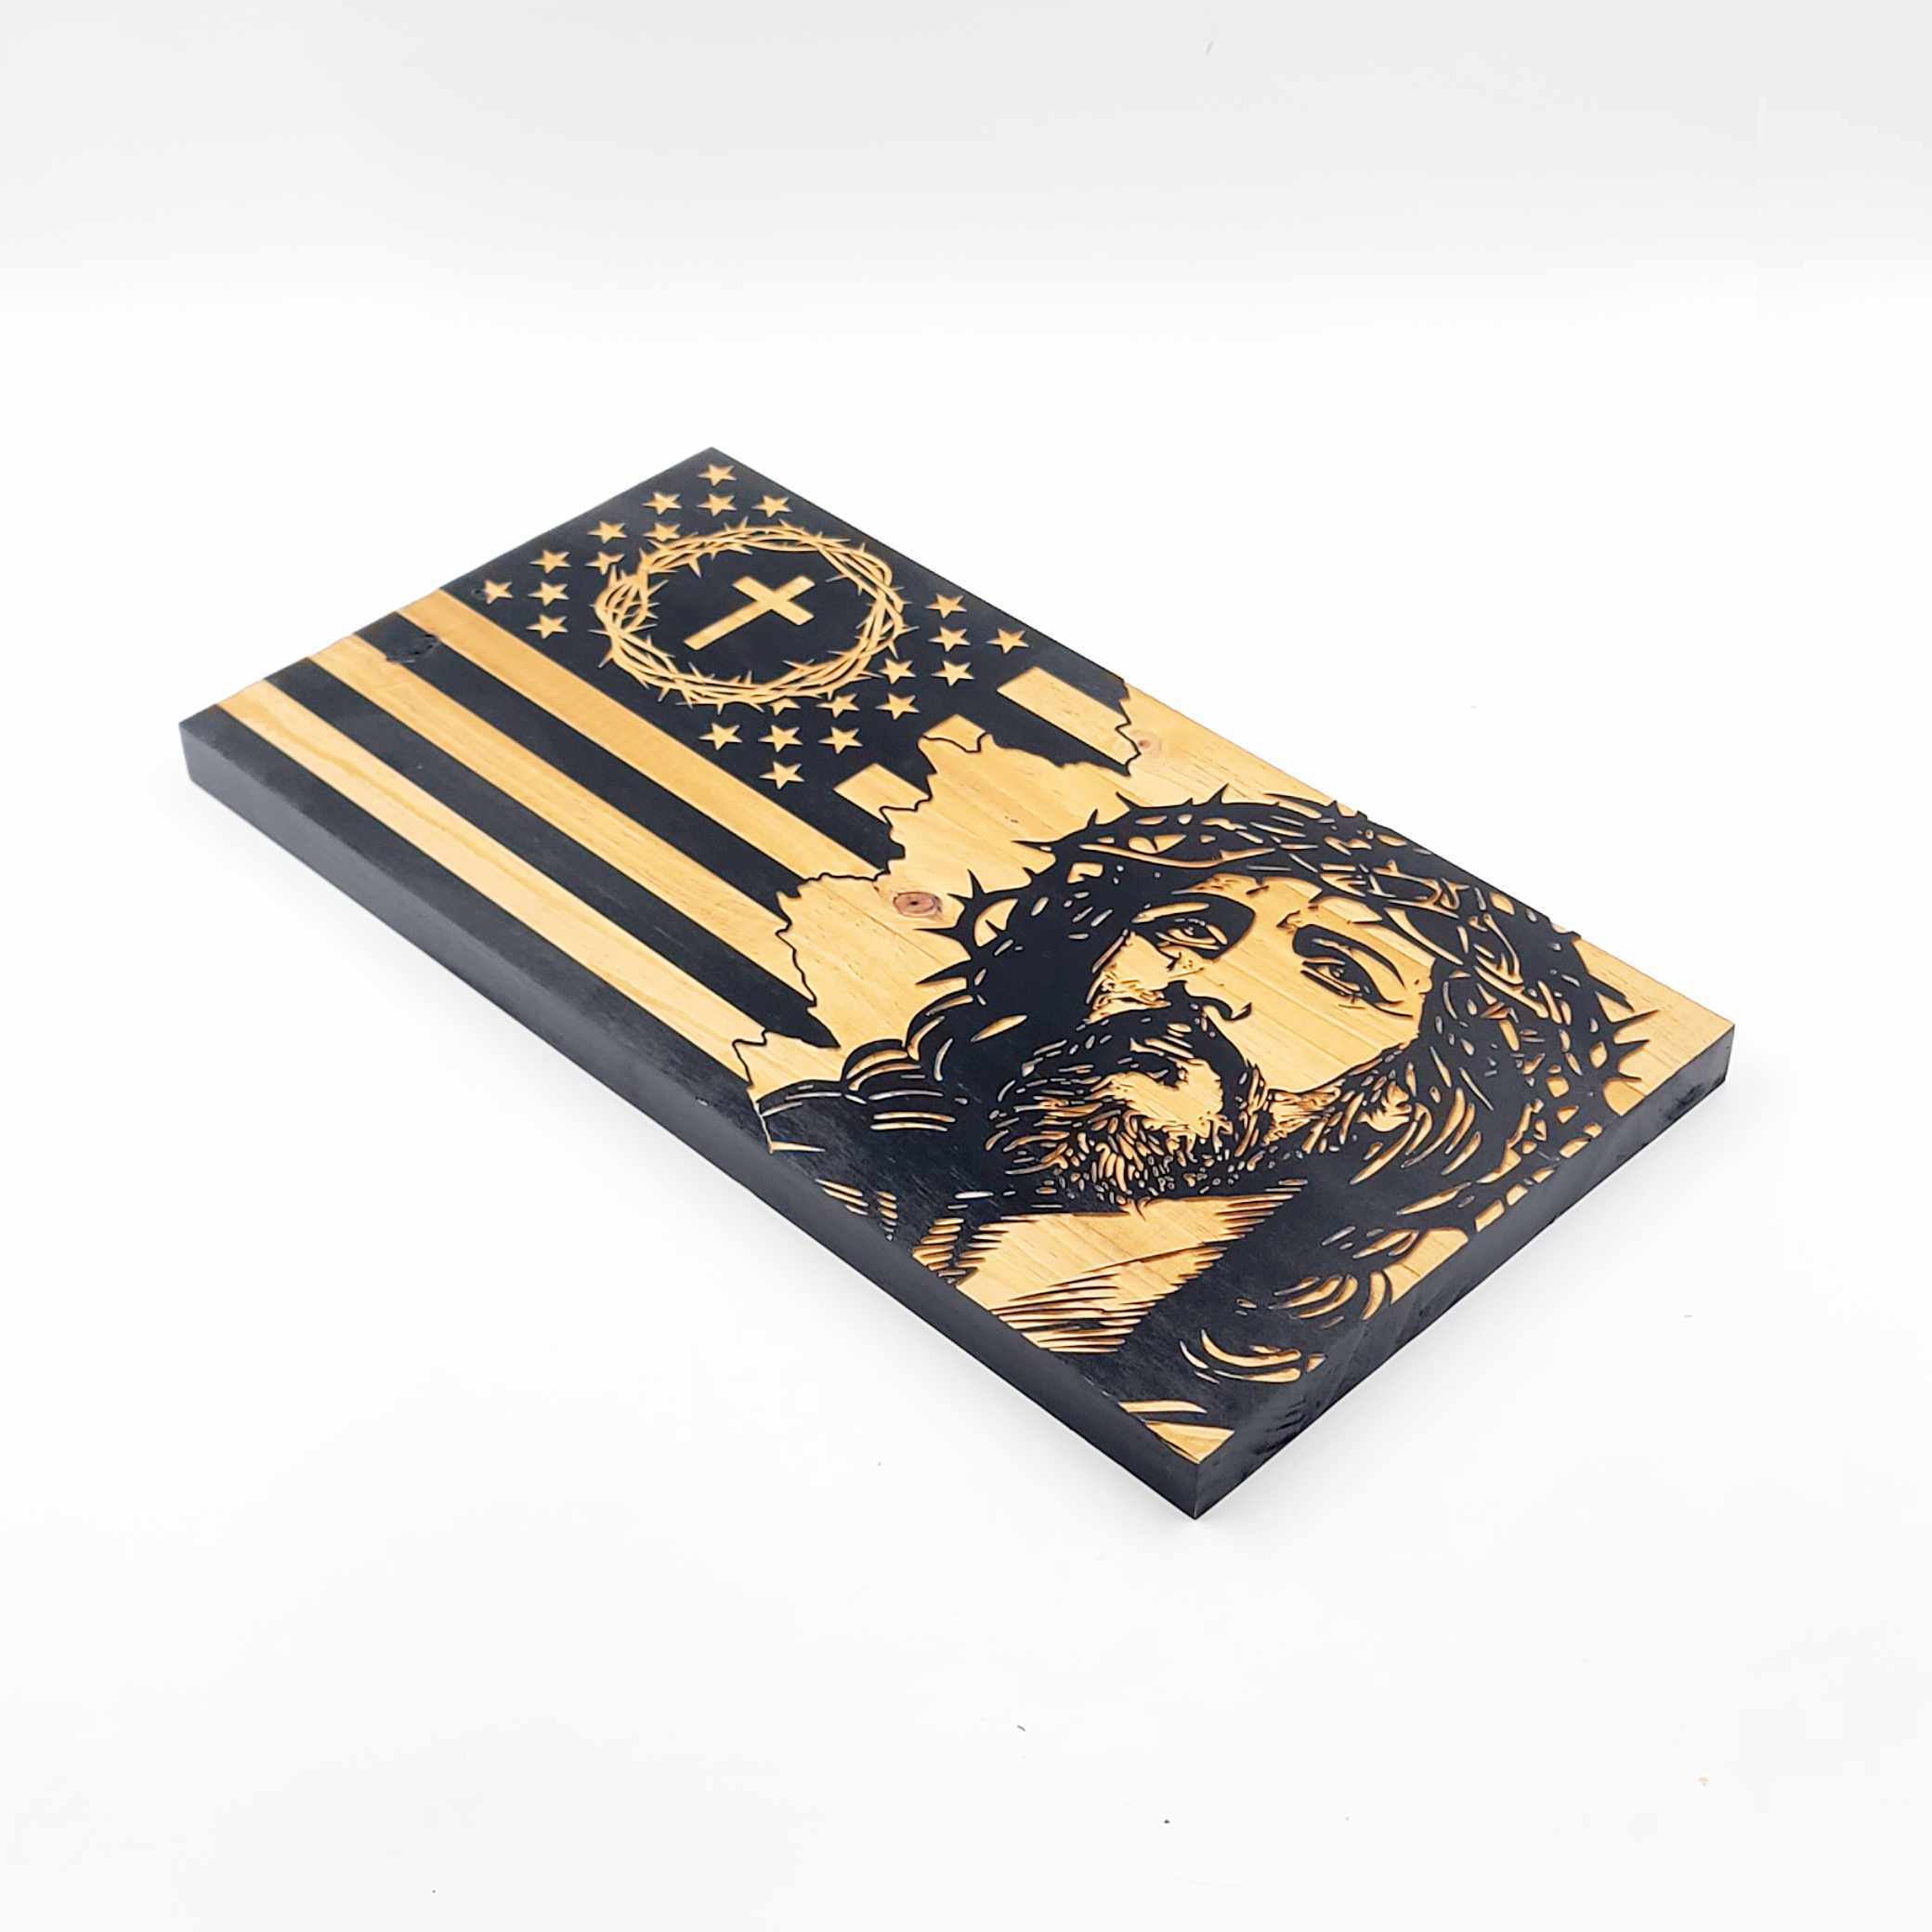 Laser Engraved Wooden American Flag with Jesus Christ